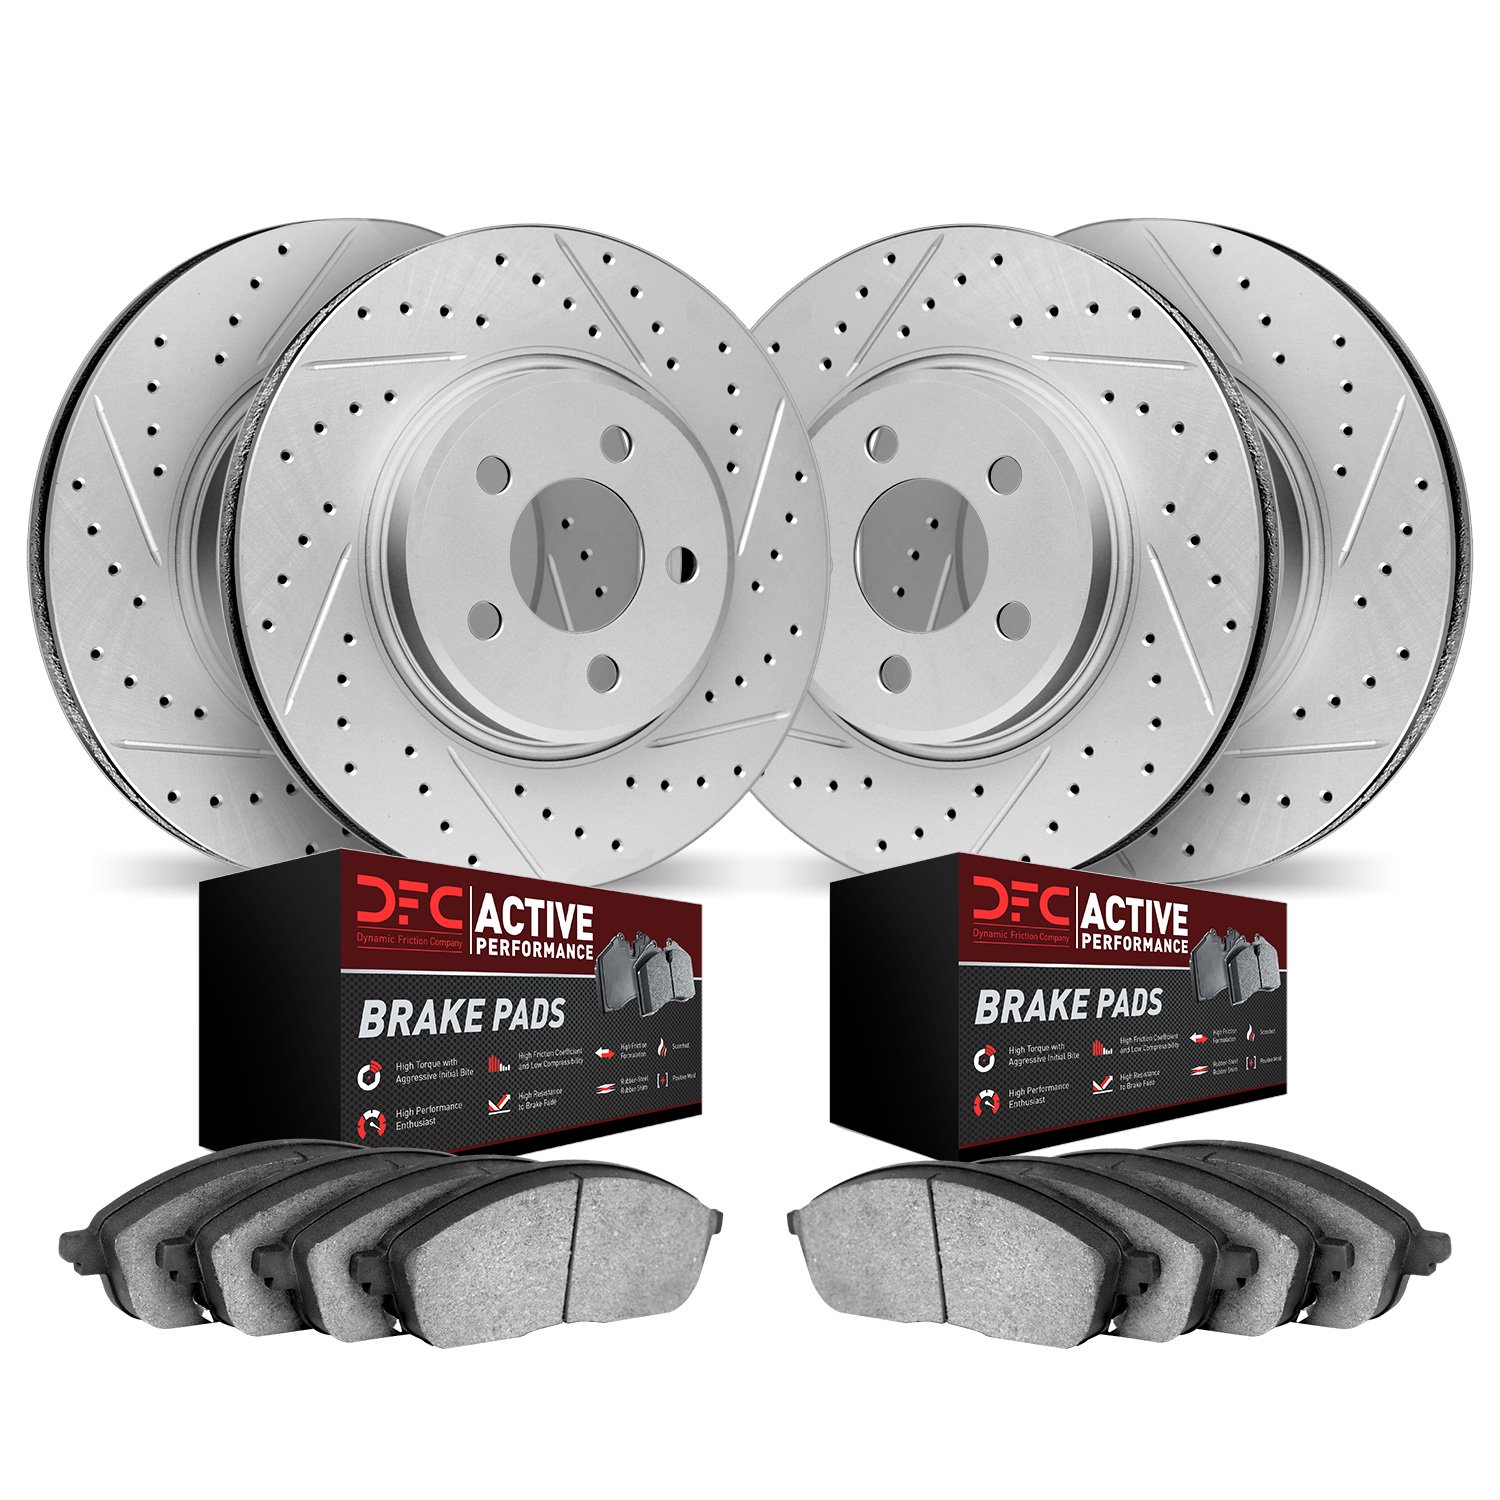 2704-47000 Geoperformance Drilled/Slotted Brake Rotors with Active Performance Pads Kit, 1963-1982 GM, Position: Front and Rear